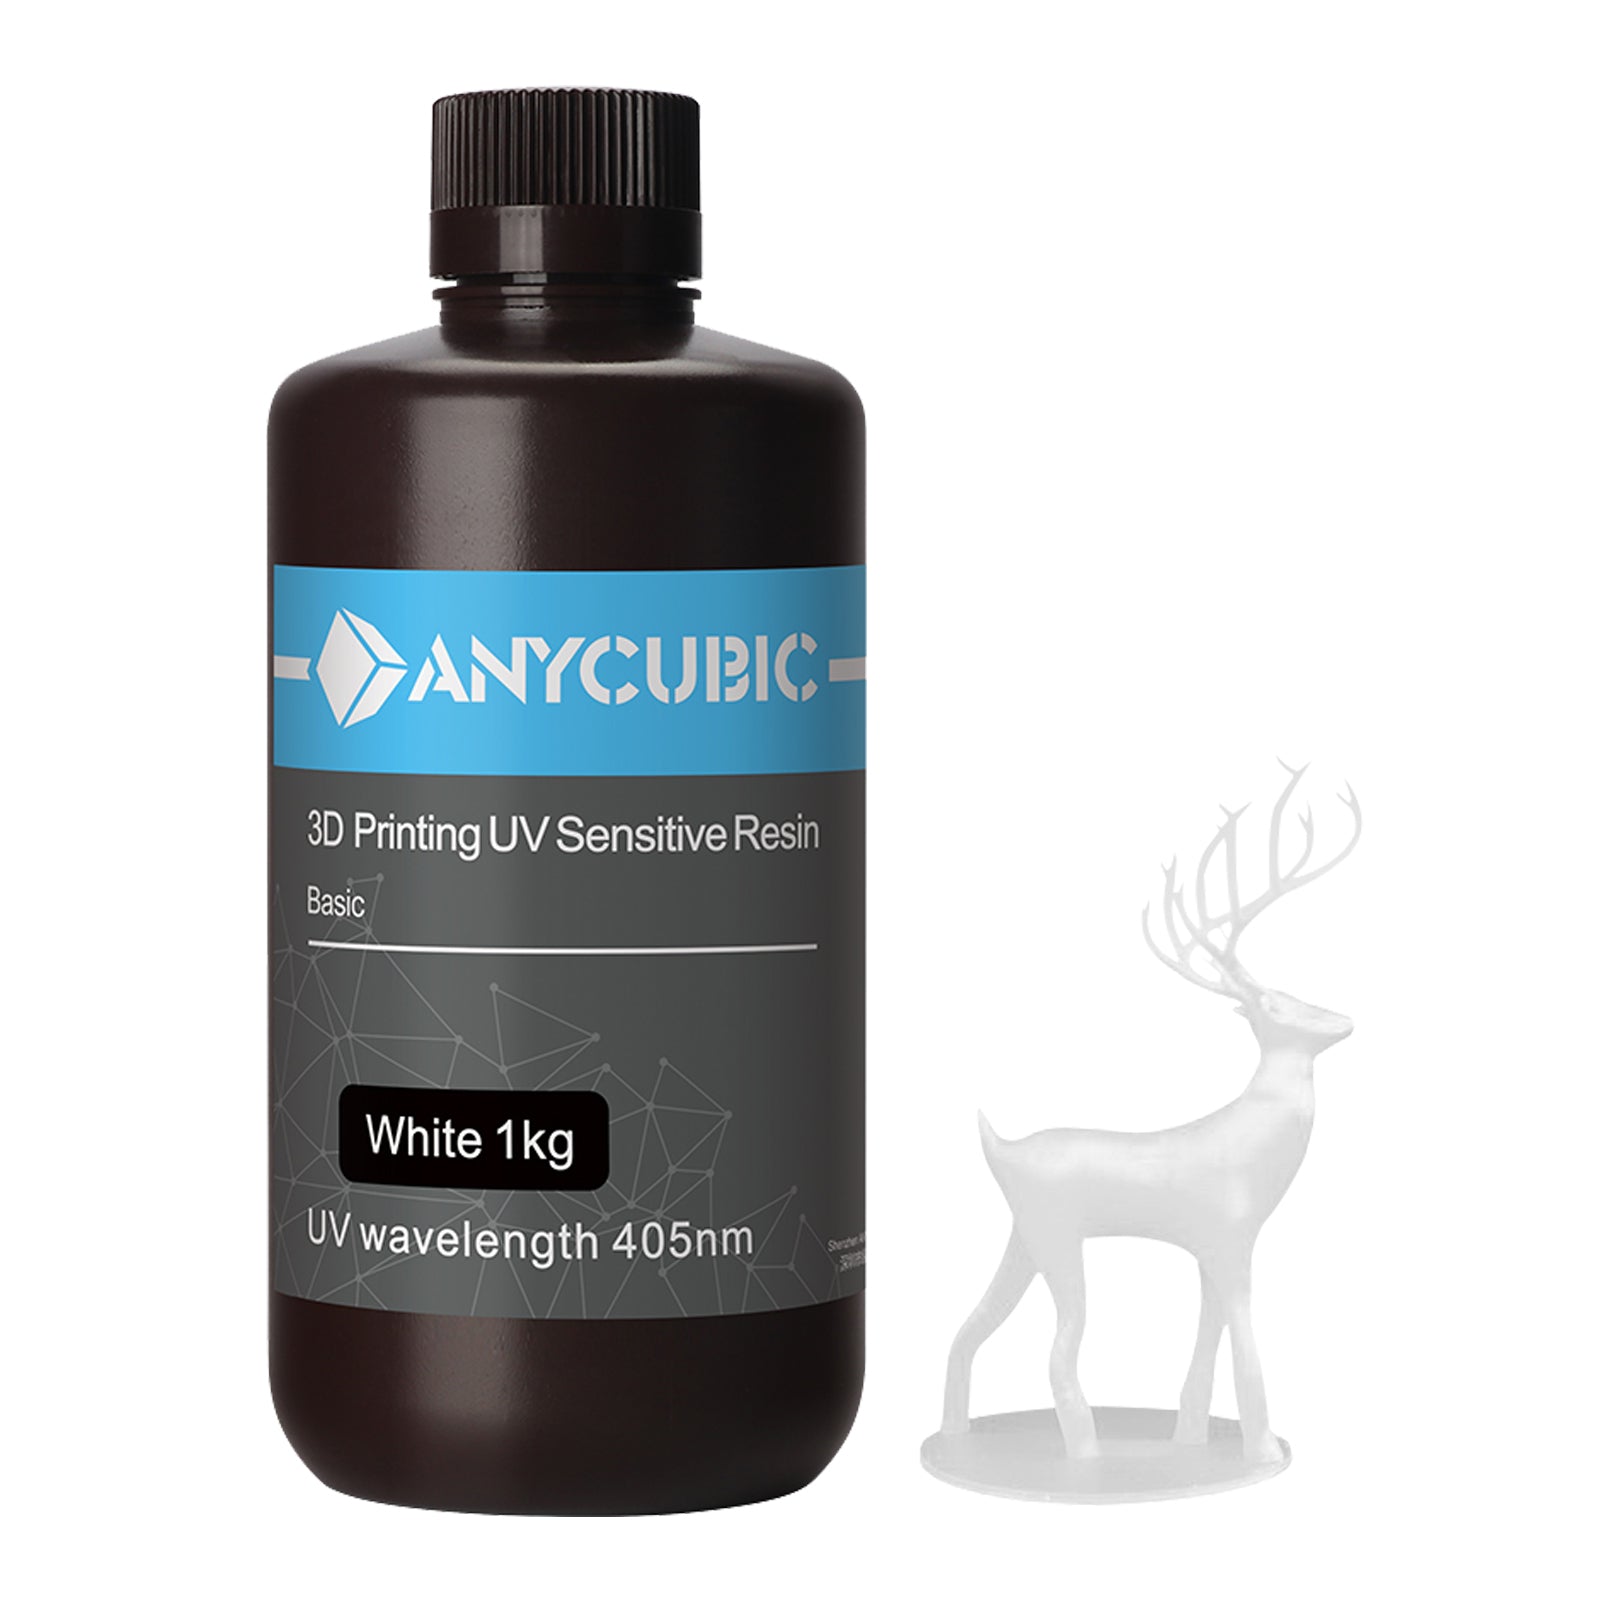 1kg ANYCUBIC 3D Printer Resin 405nm LCD Quick-Curing in transparent, white, green or grey color